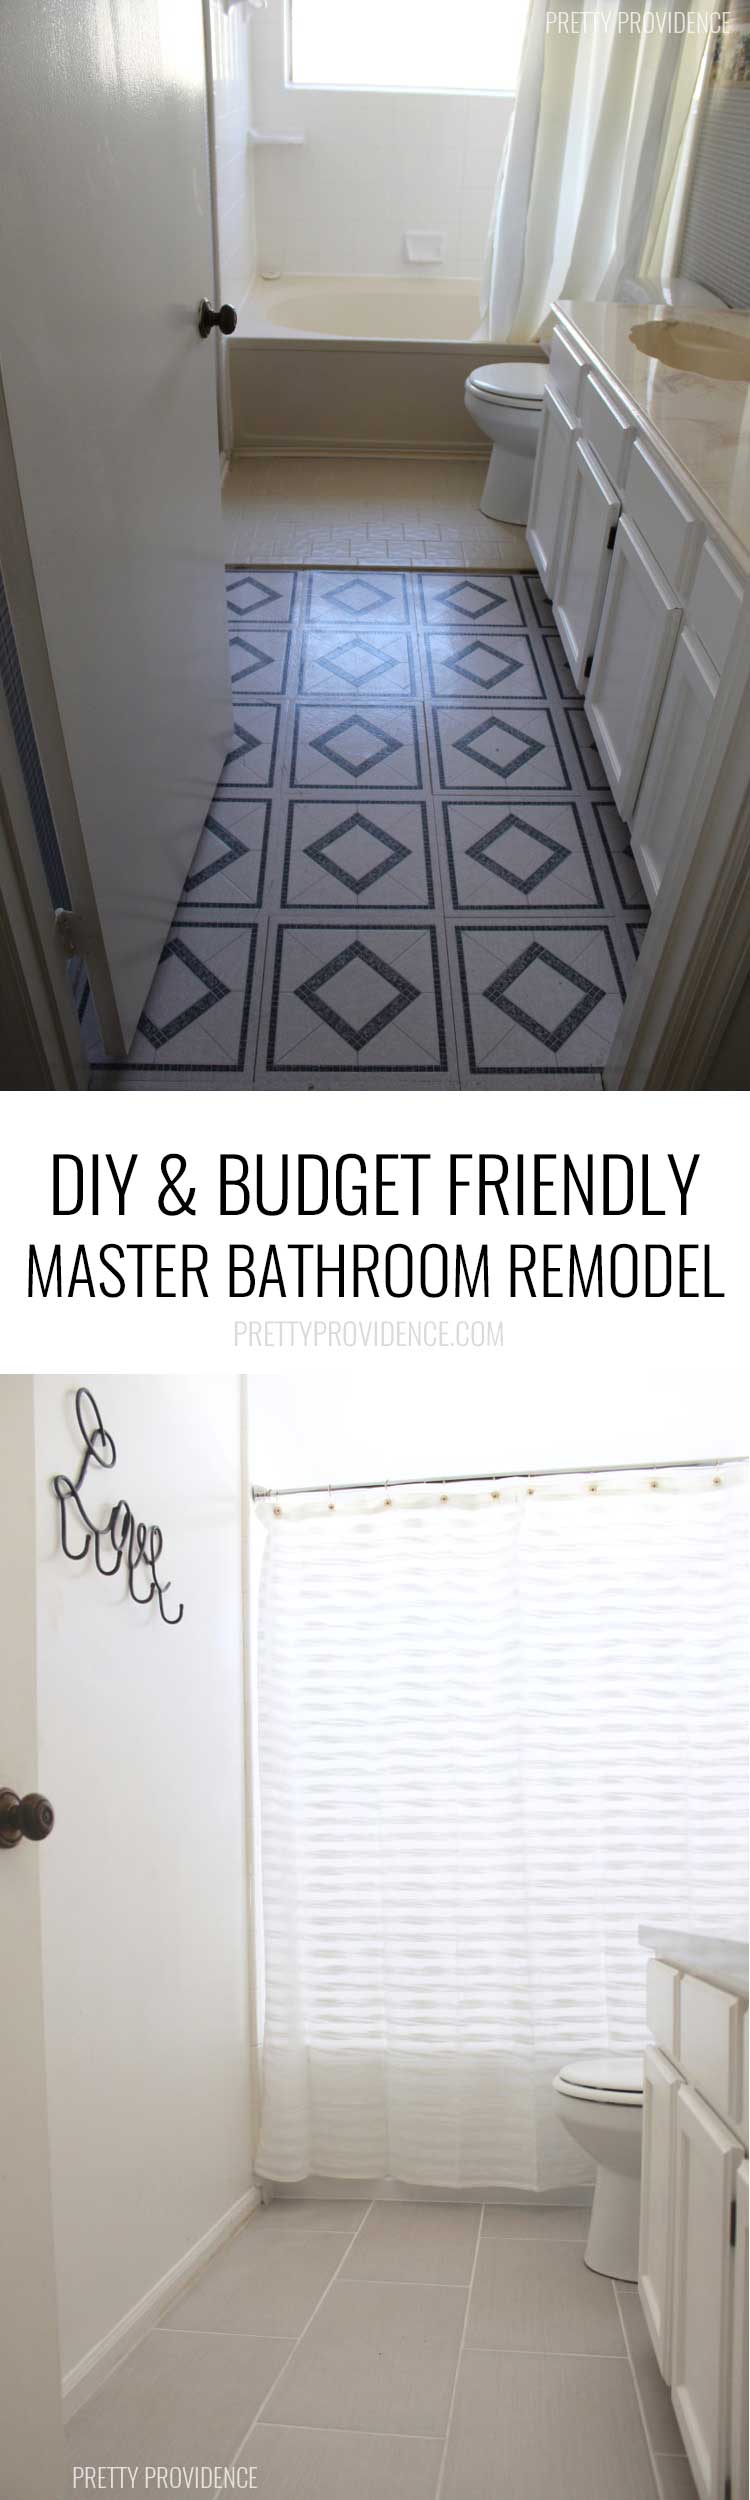 I LOVE this DIY master bathroom remodel! Budget is realistic too!!! 